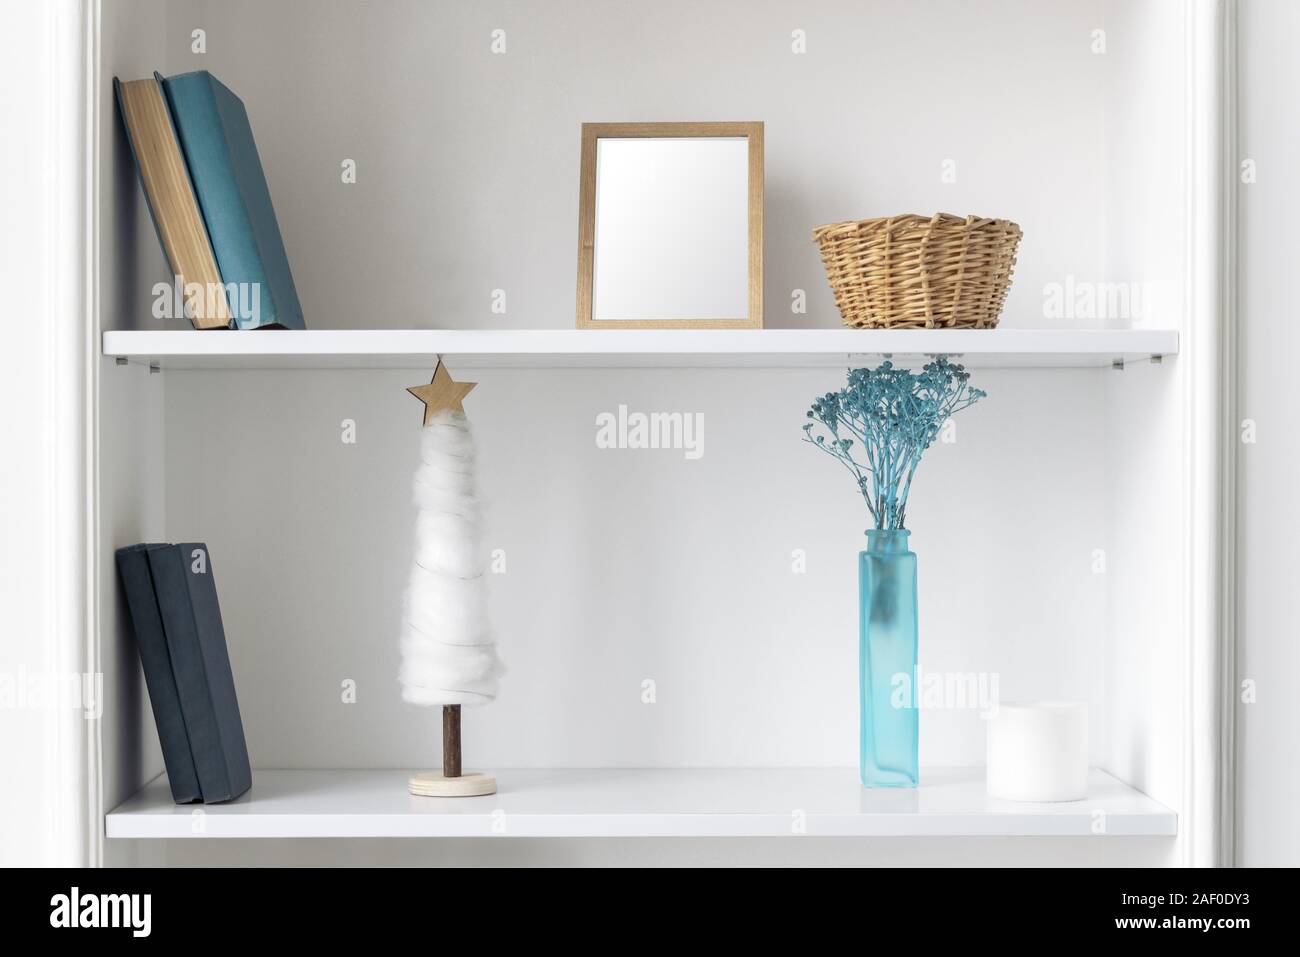 Blue vase, frame and books on white shelves. Classic blue Home accessories and books on wall shelves. Stock Photo